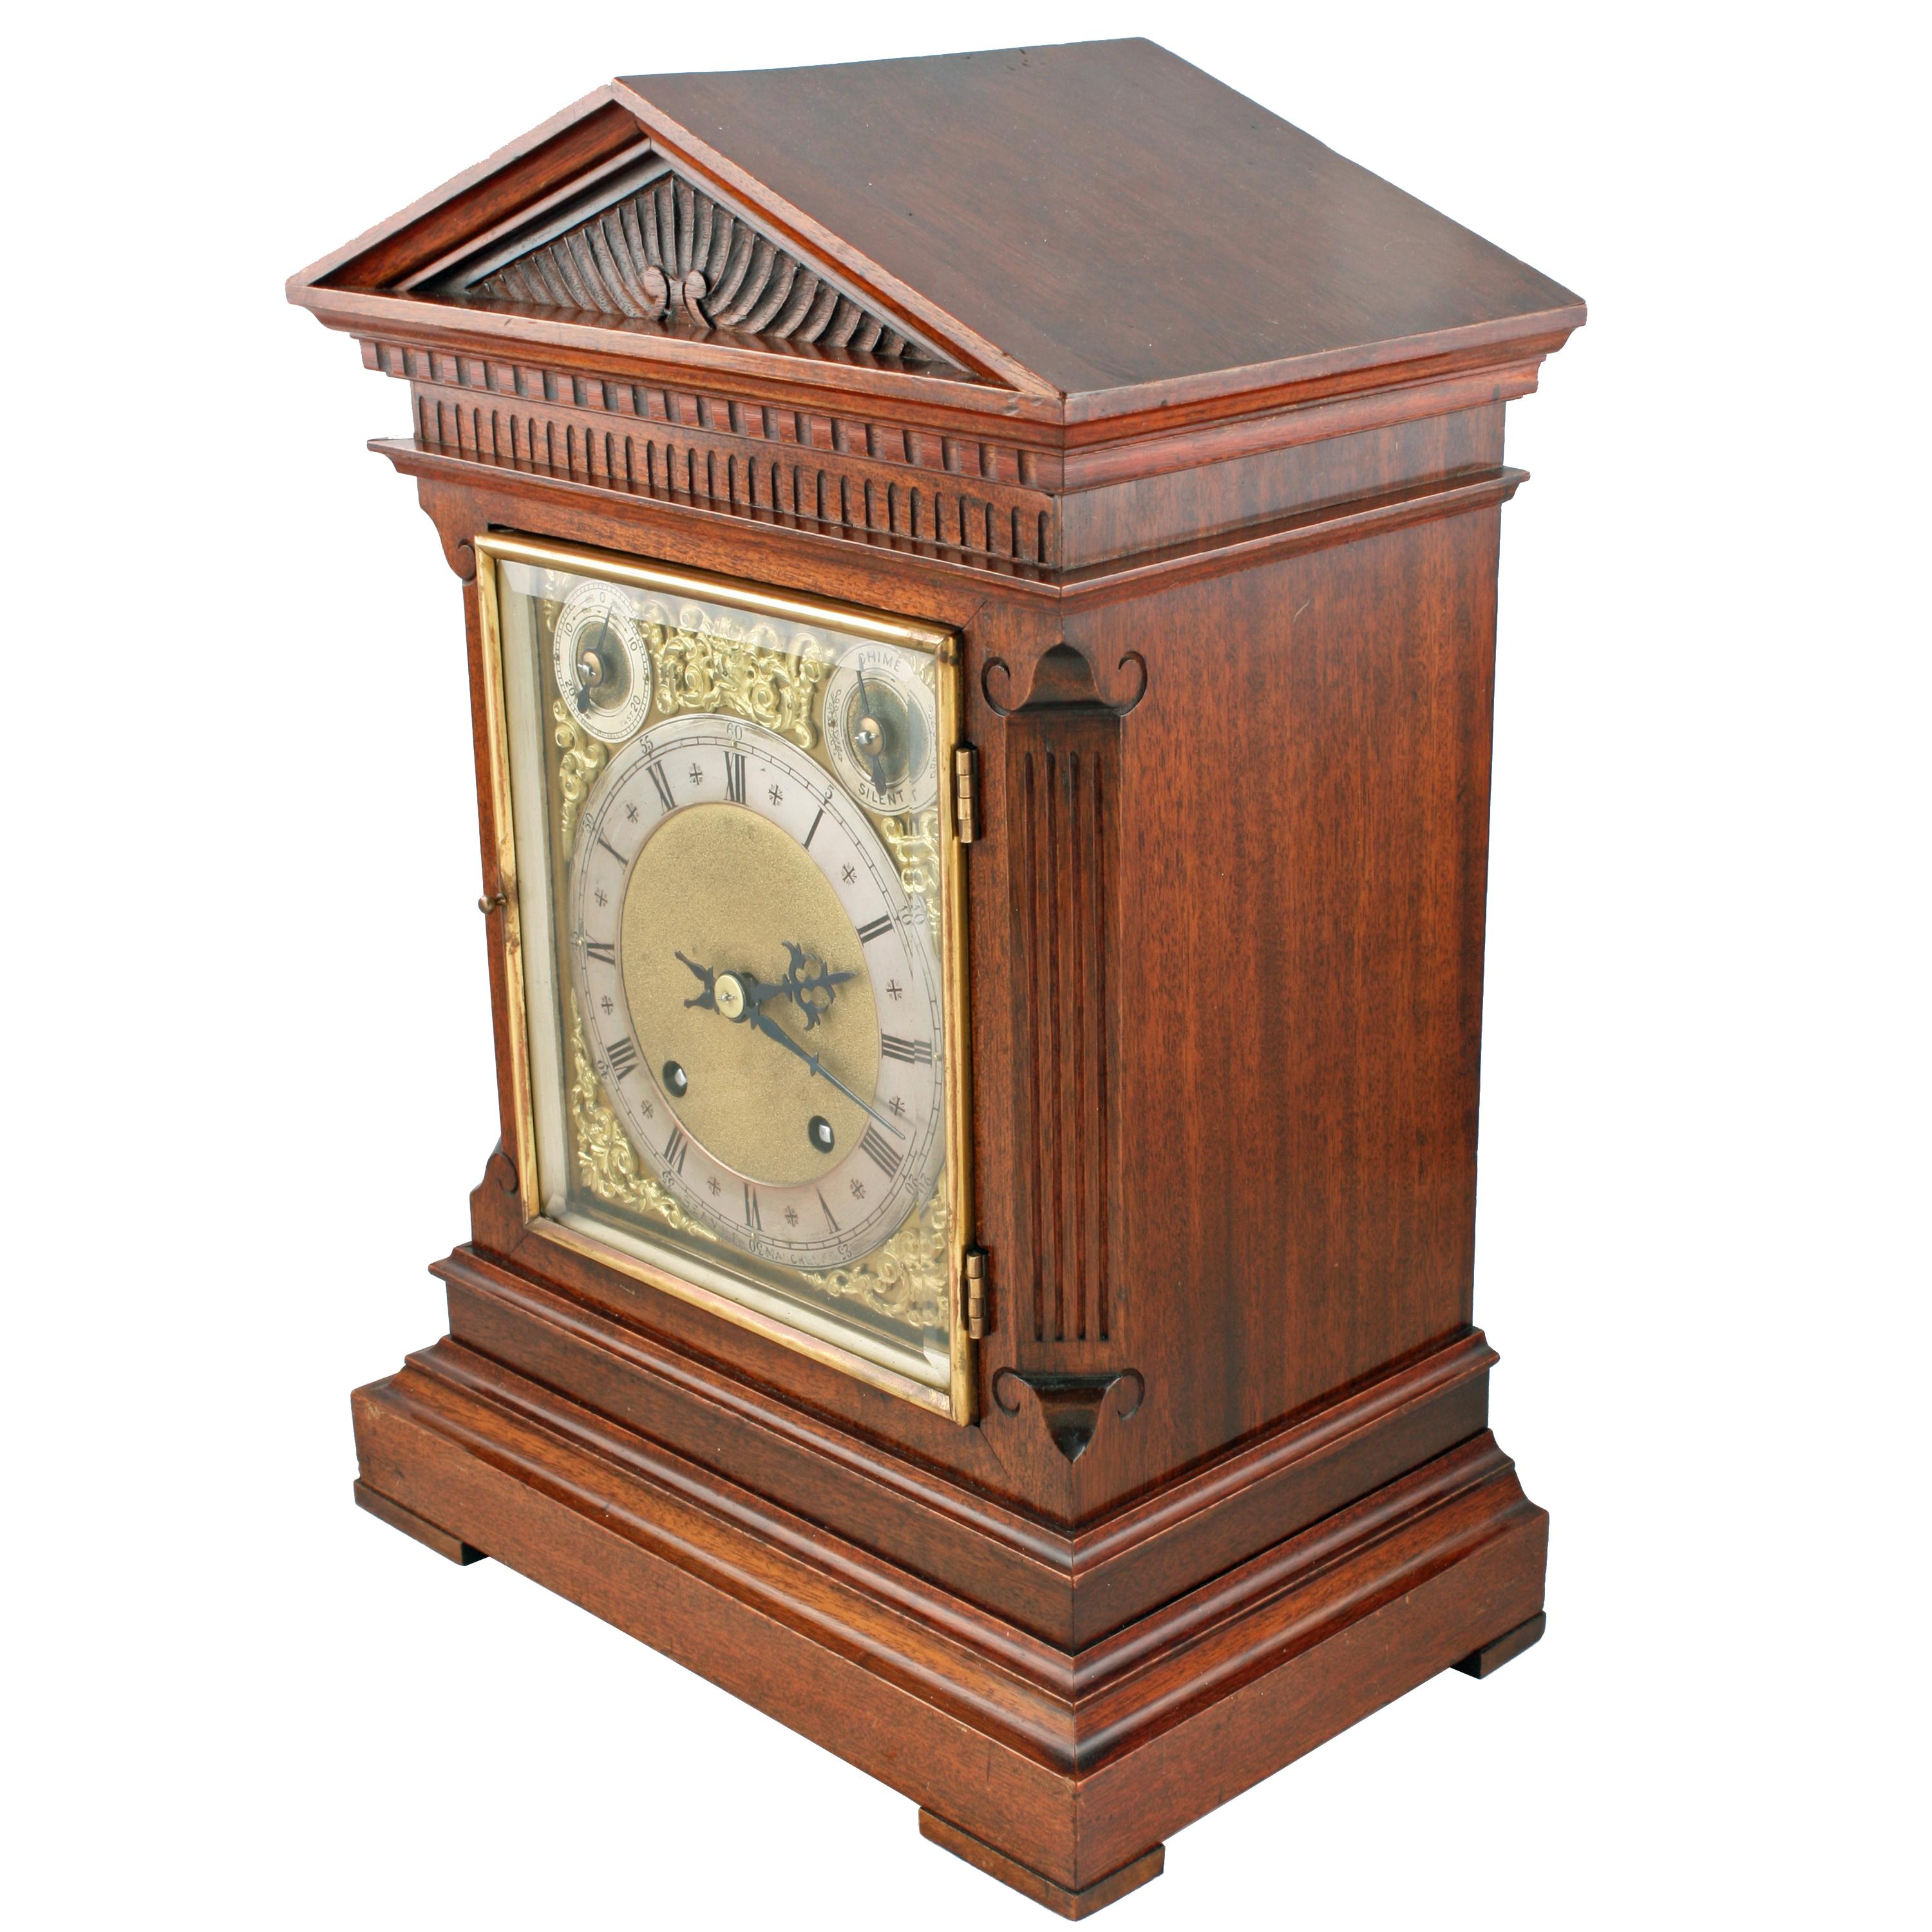 A late 19th-early 20th century walnut cased mantel clock.

The clock has an eight day movement works that are stamped 